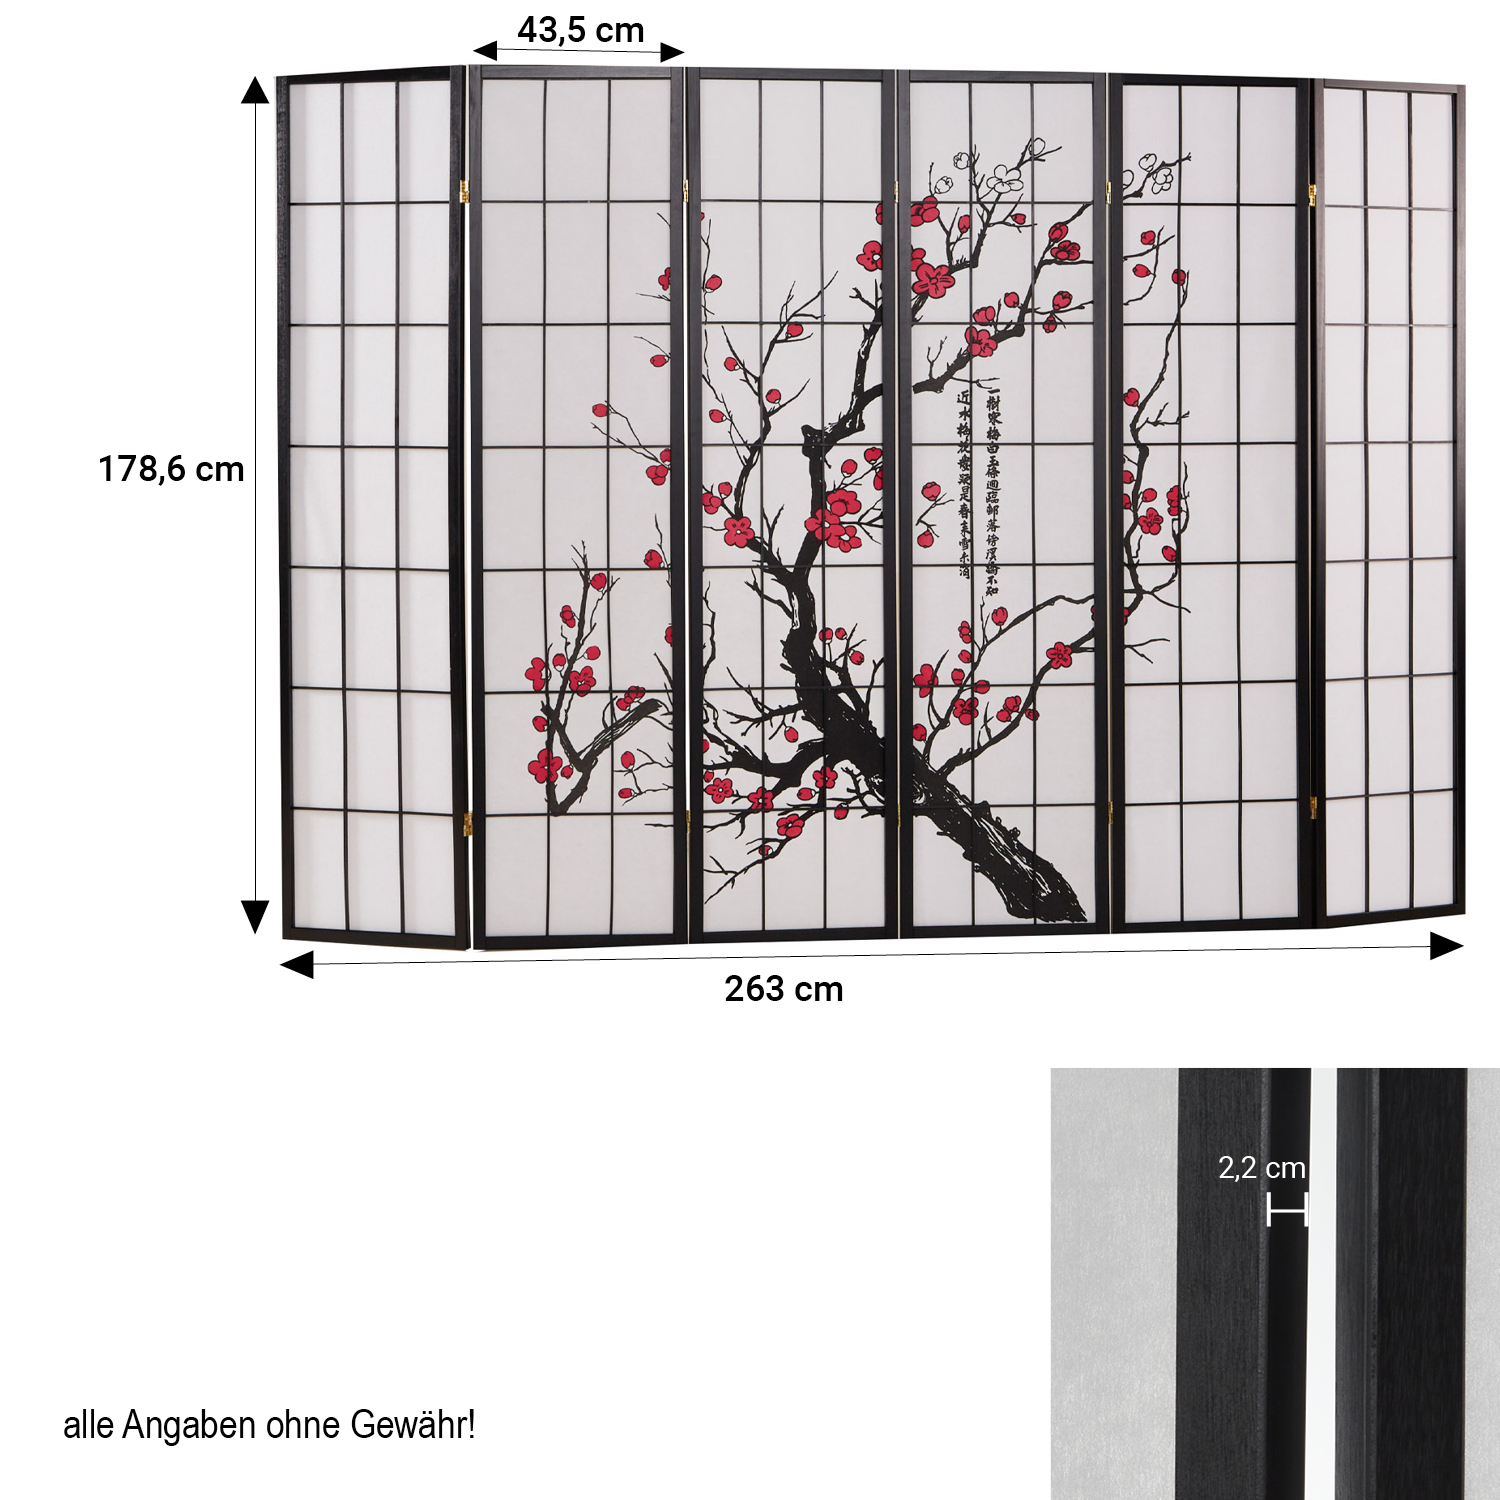 Screen room divider 6 parts wood black, rice paper white cherry pattern